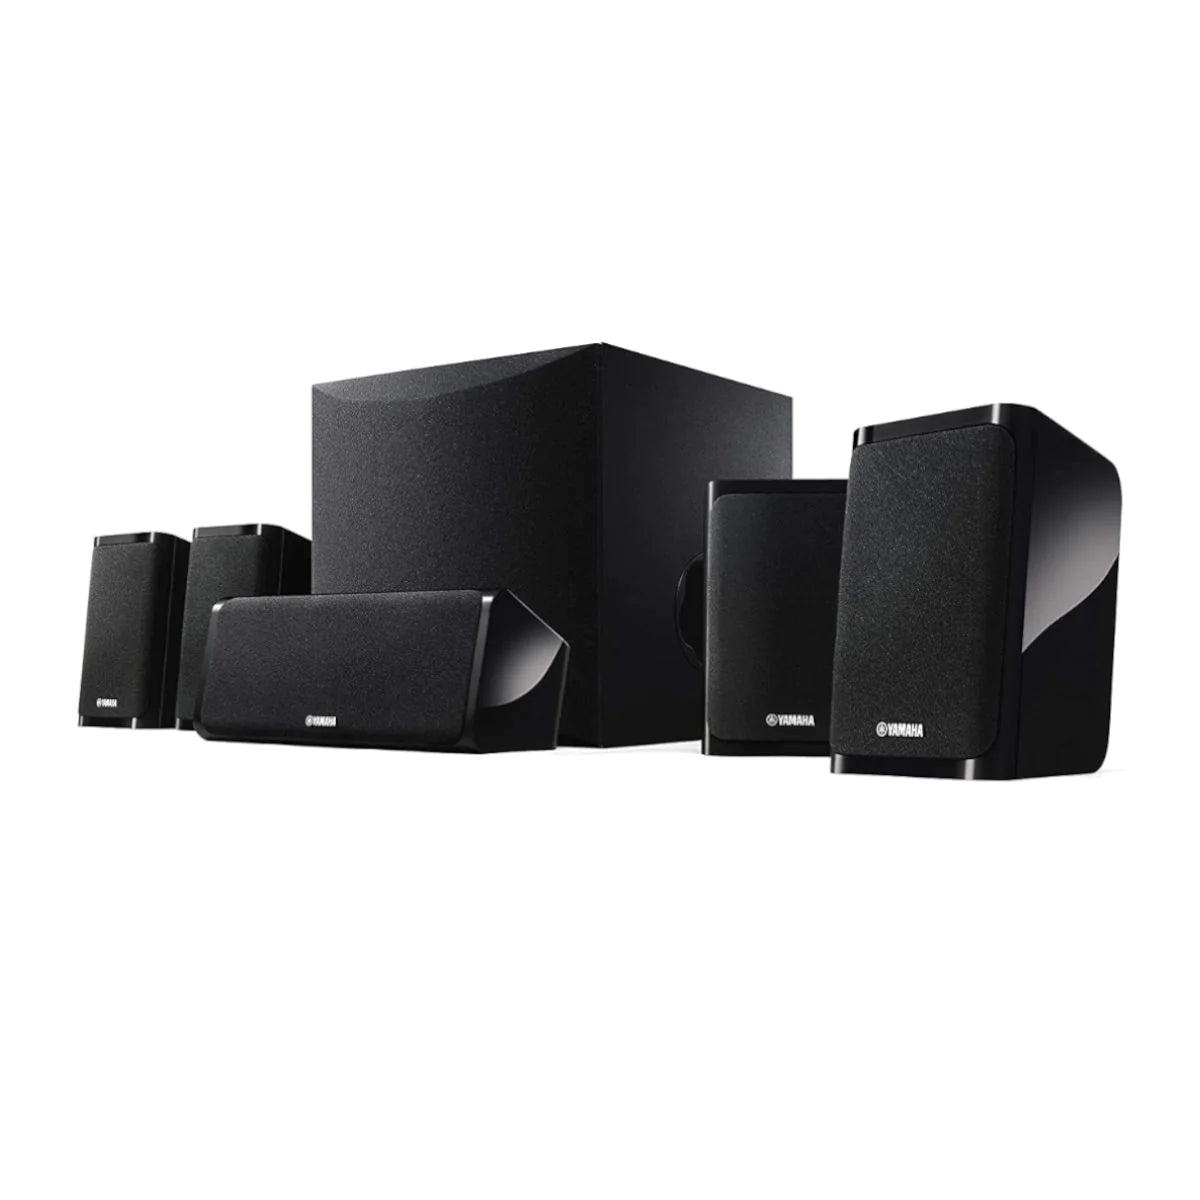 Yamaha NS-P41 5.1 Channel Home Theater Speaker Package